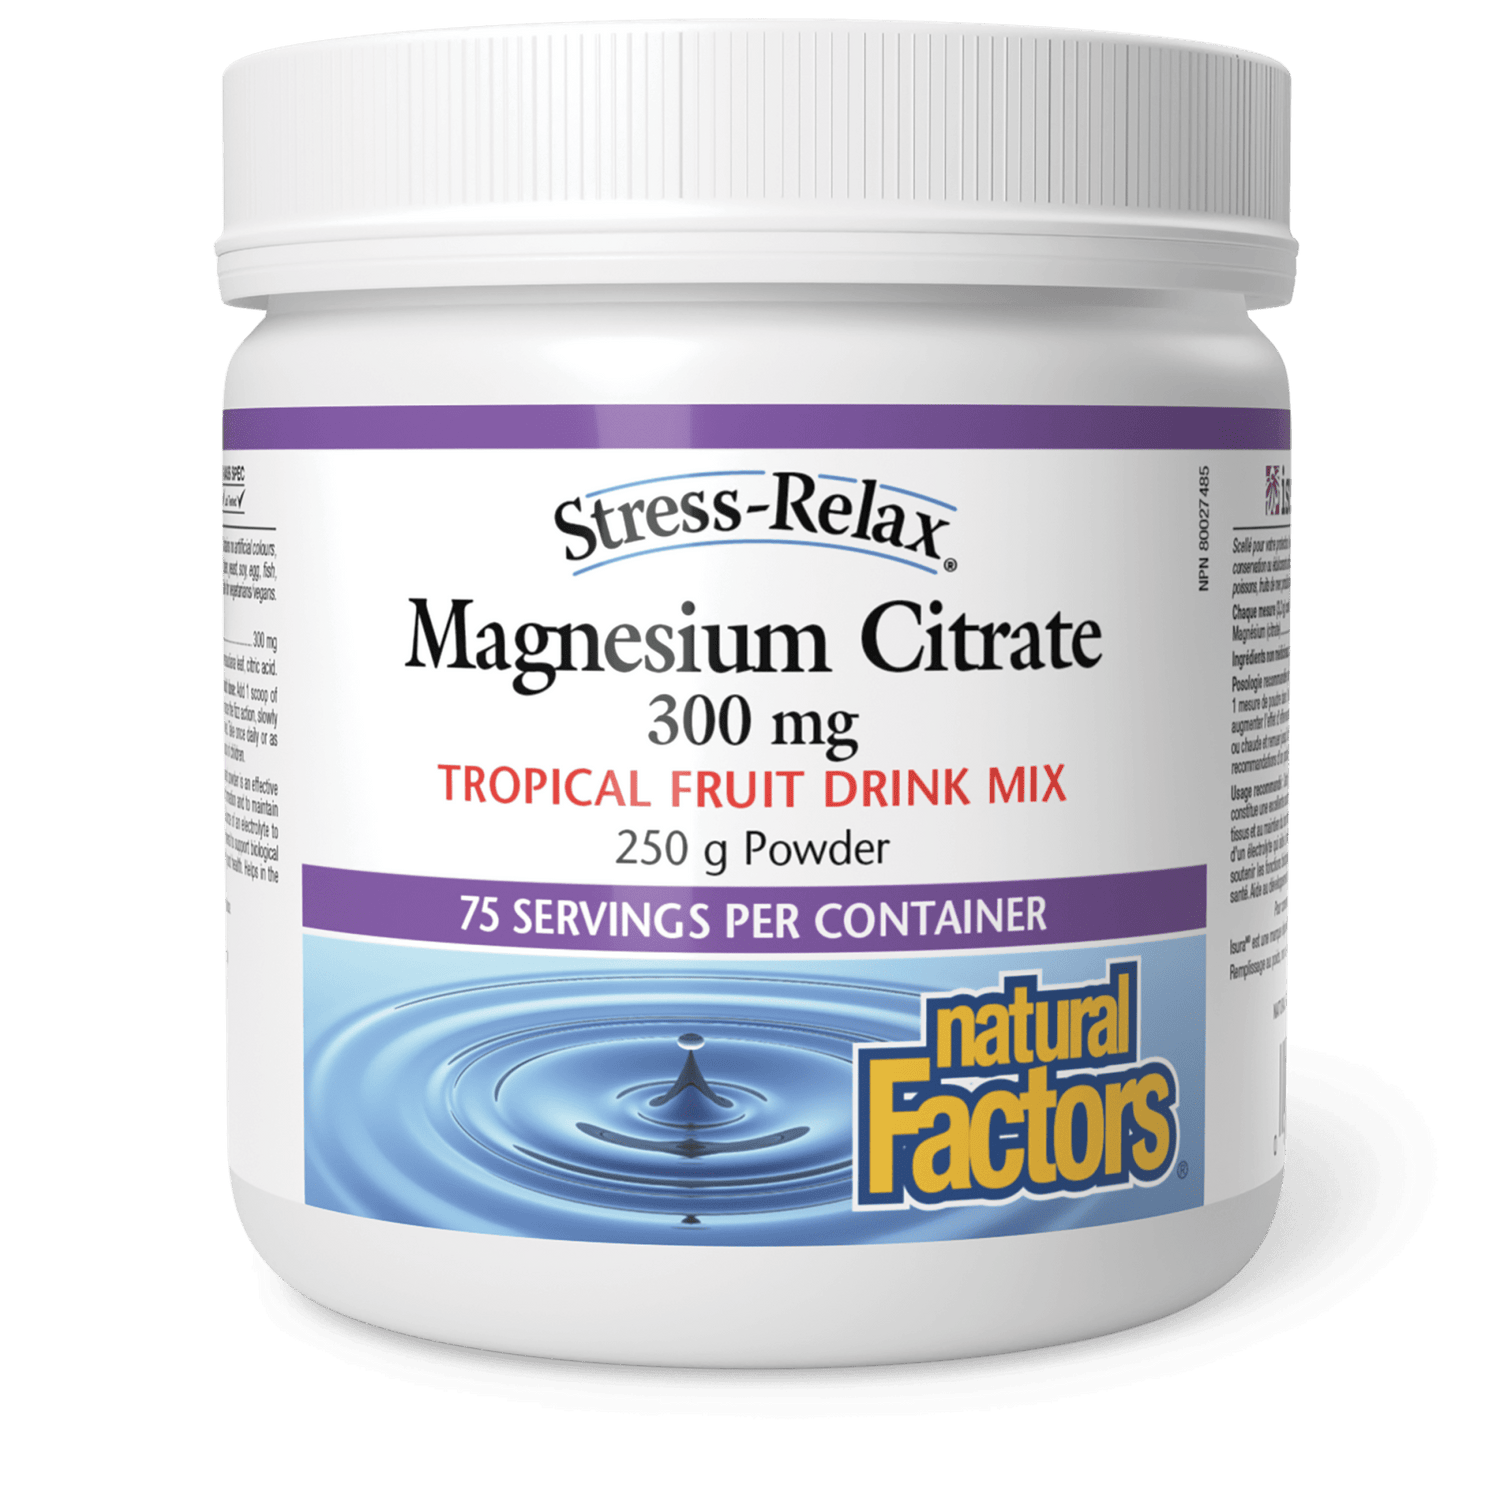 Magnesium Citrate 300 mg, Tropical Fruit, Stress-Relax, Natural Factors|v|image|3542